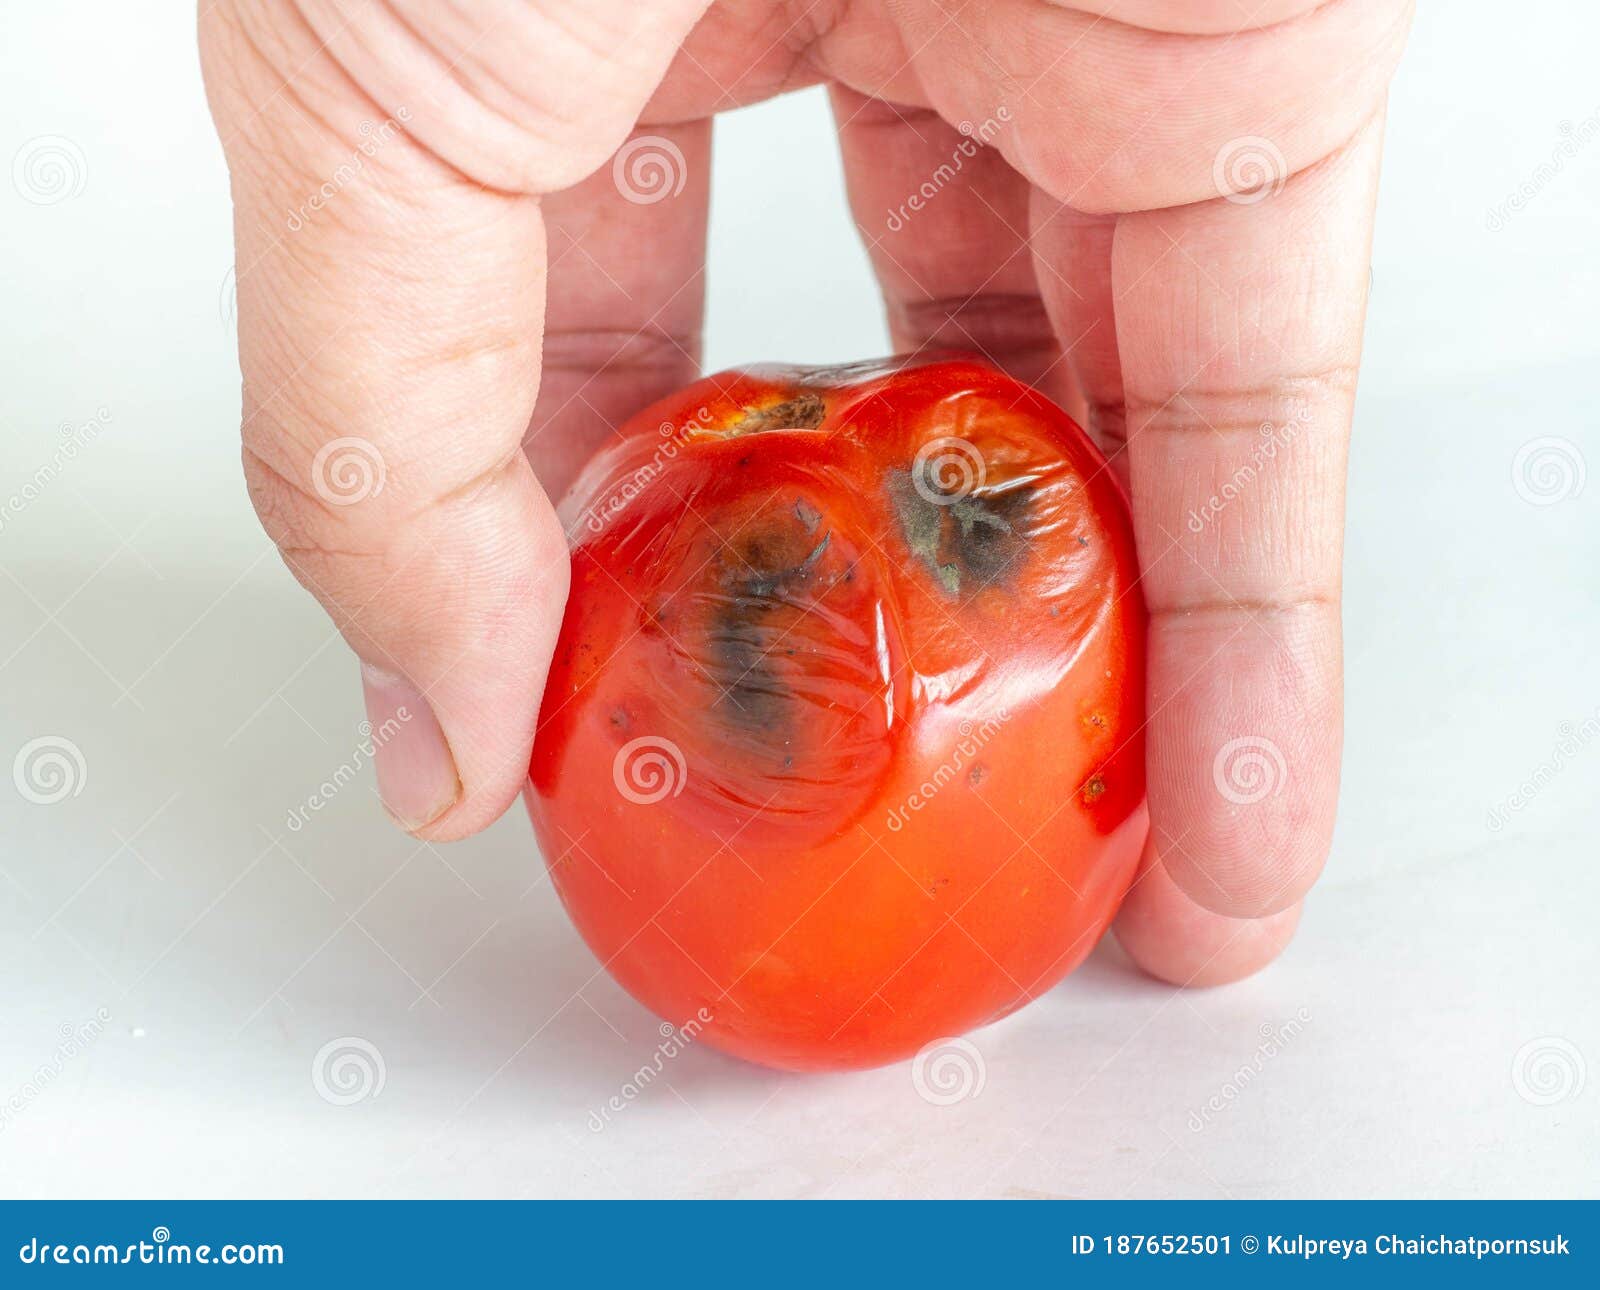 Rotten Tomatoes Is A Red Fruit Sour And Sweet Skin Has Black Mold Tomato Picking White Background Stock Image Image Of Natural Food 187652501